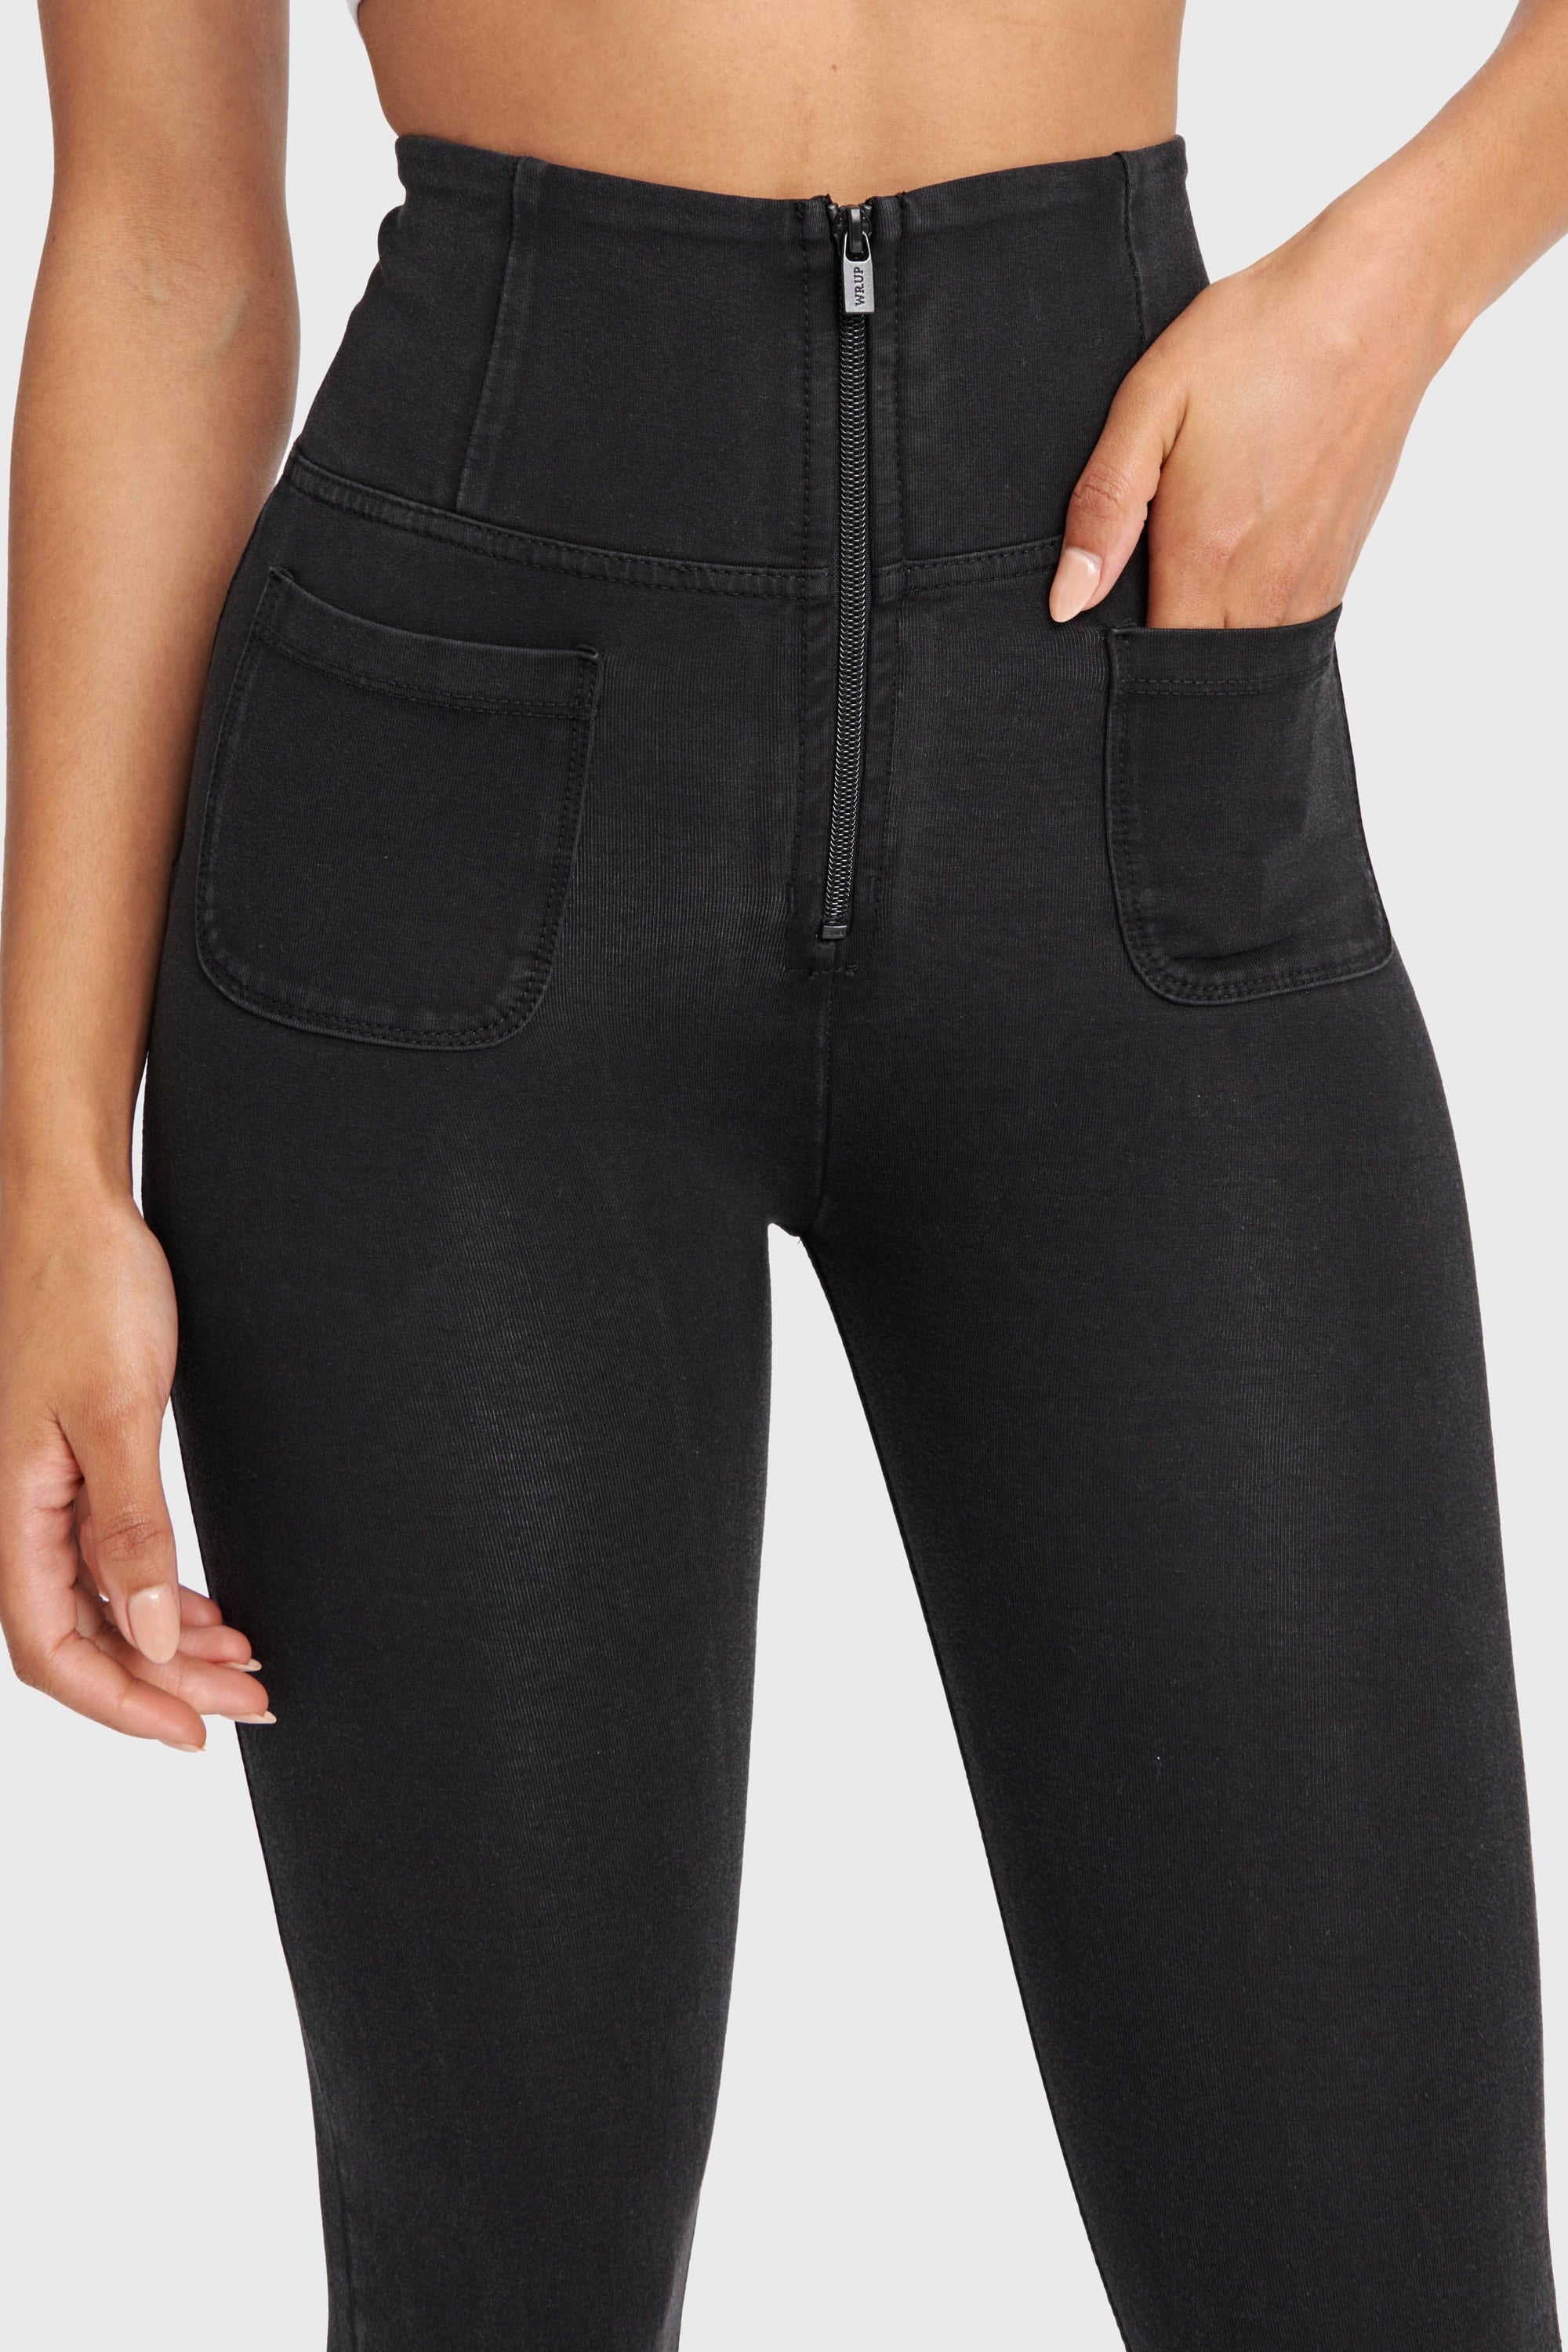 WR.UP® Denim With Front Pockets - Super High Waisted - 7/8 Length - Black + Black Stitching 14